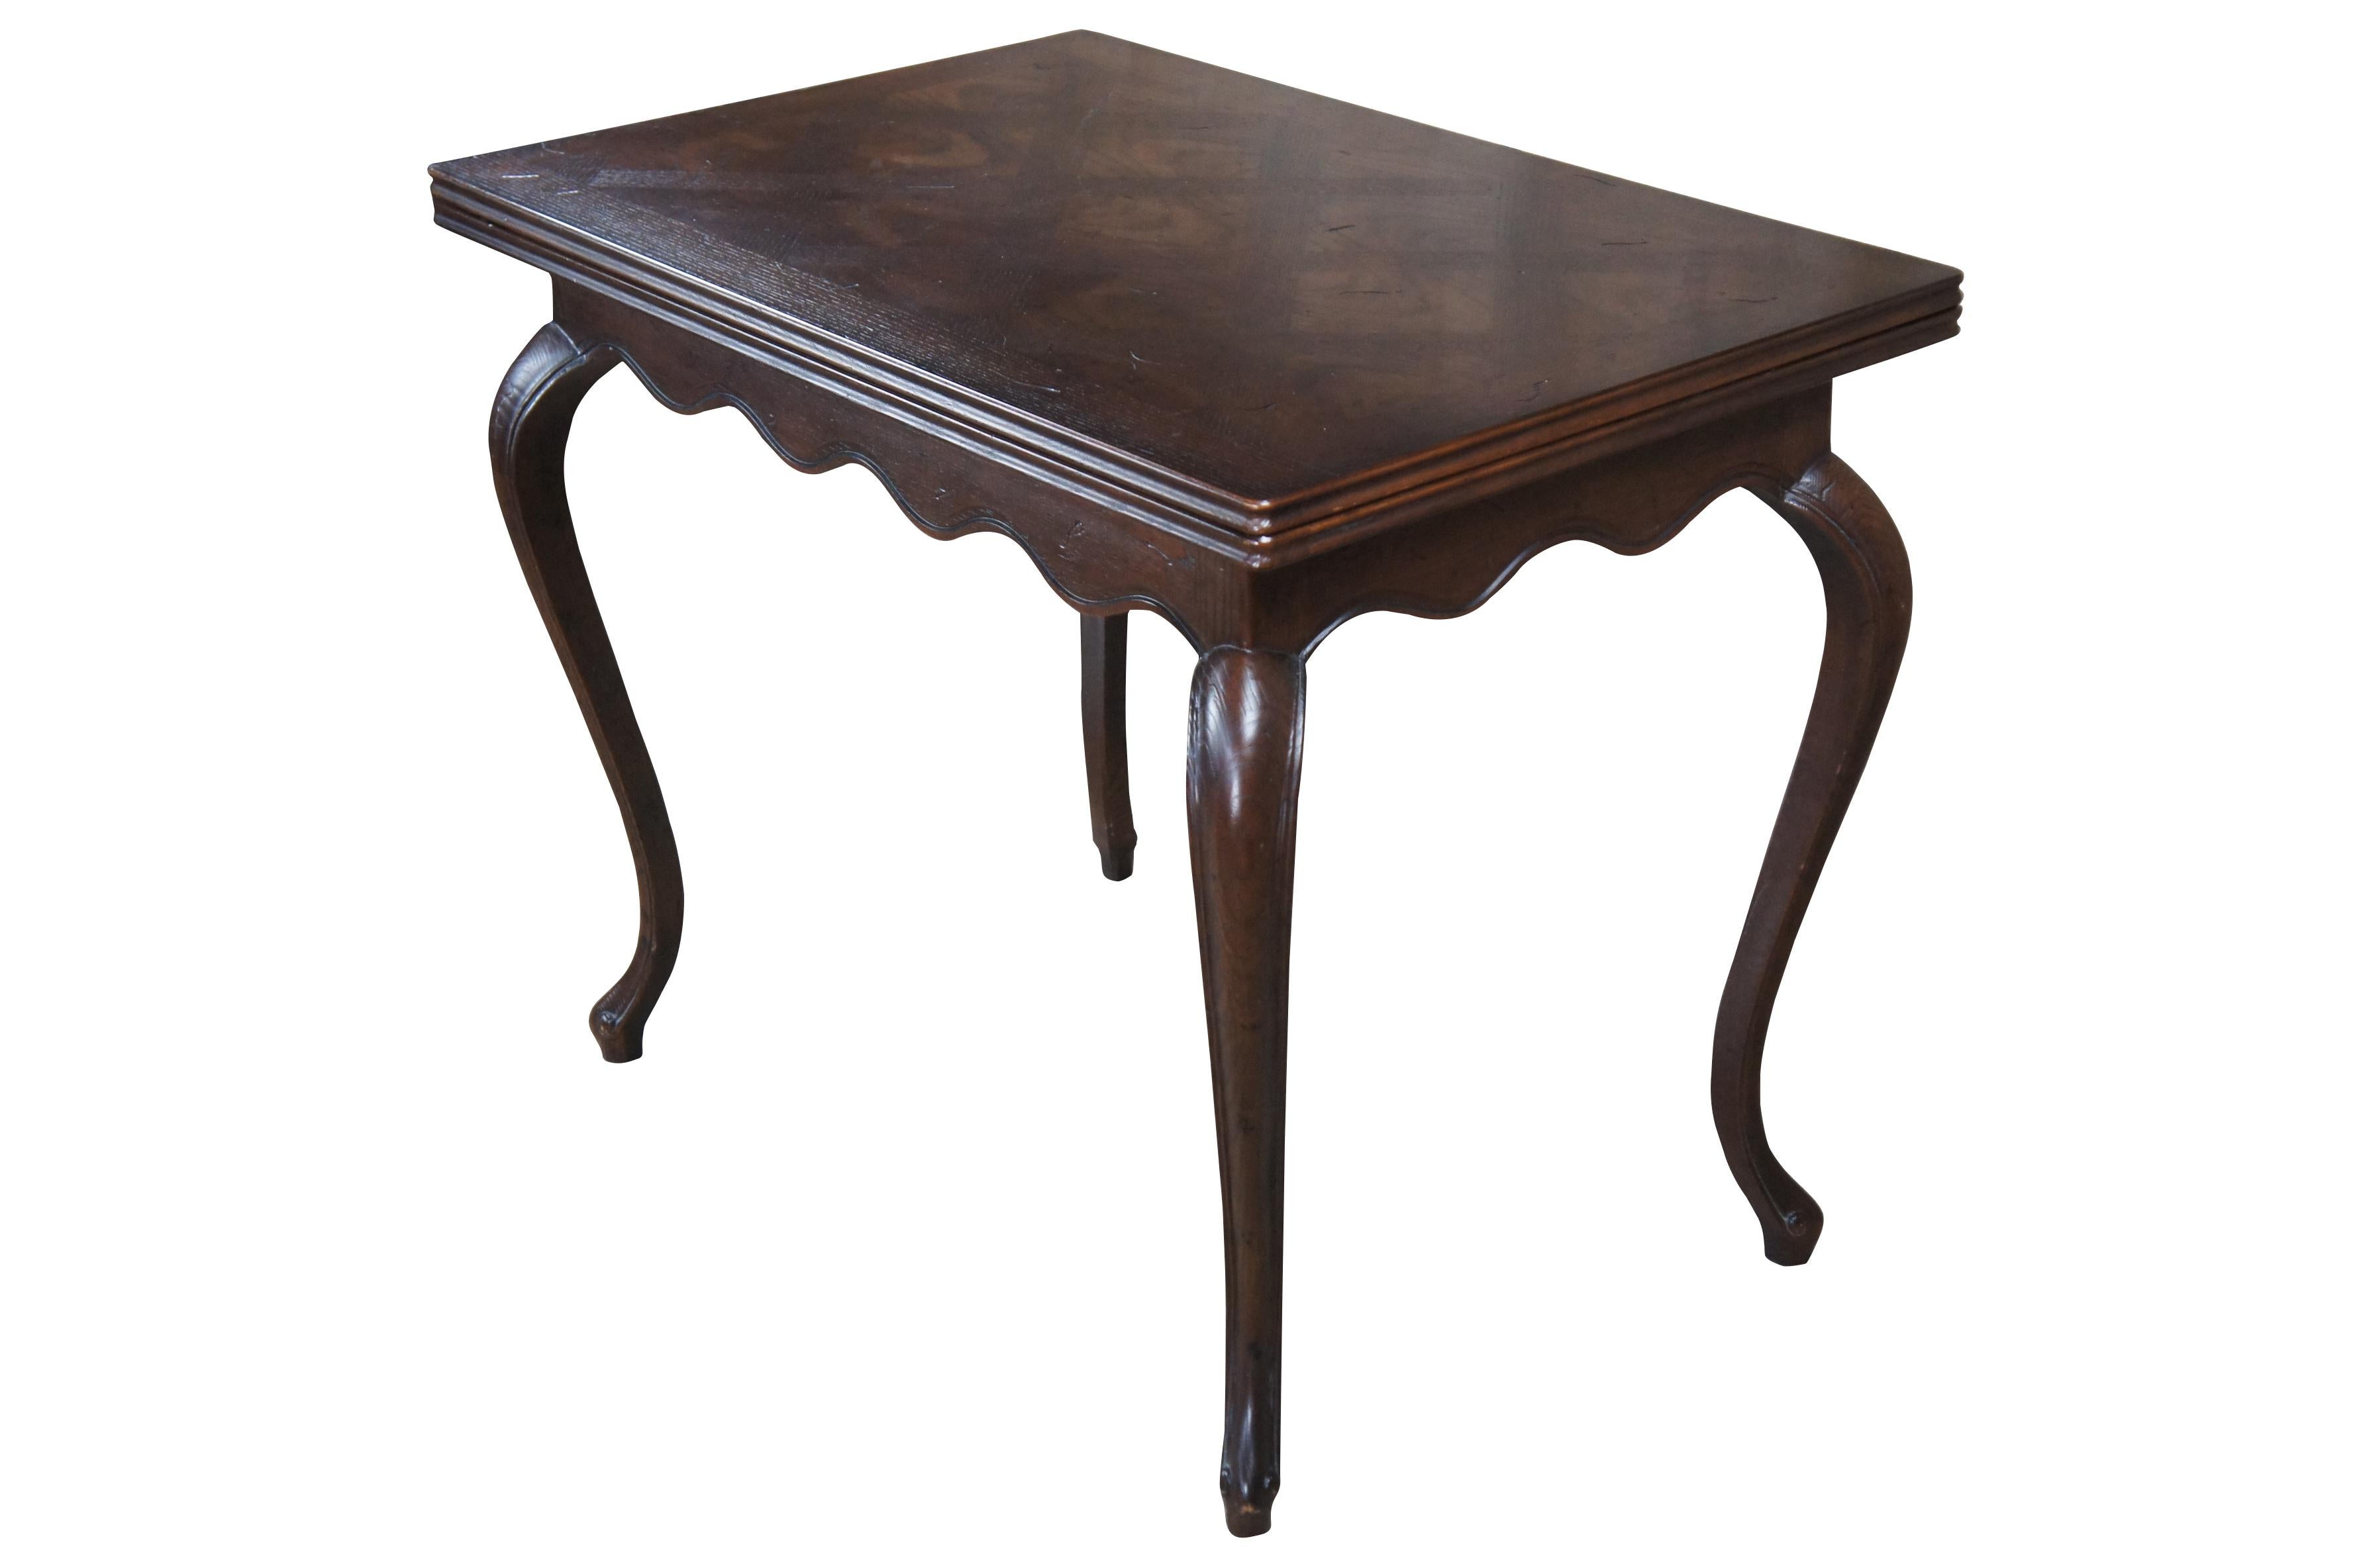 A lovely French Country swivel top game / dining table by Henredon.  Part of the Four Centuries Collection, circa 1970s.  Features a rectangular frame made from oak with parquetry top that swivels and opens doubling in size.  Includes a unique